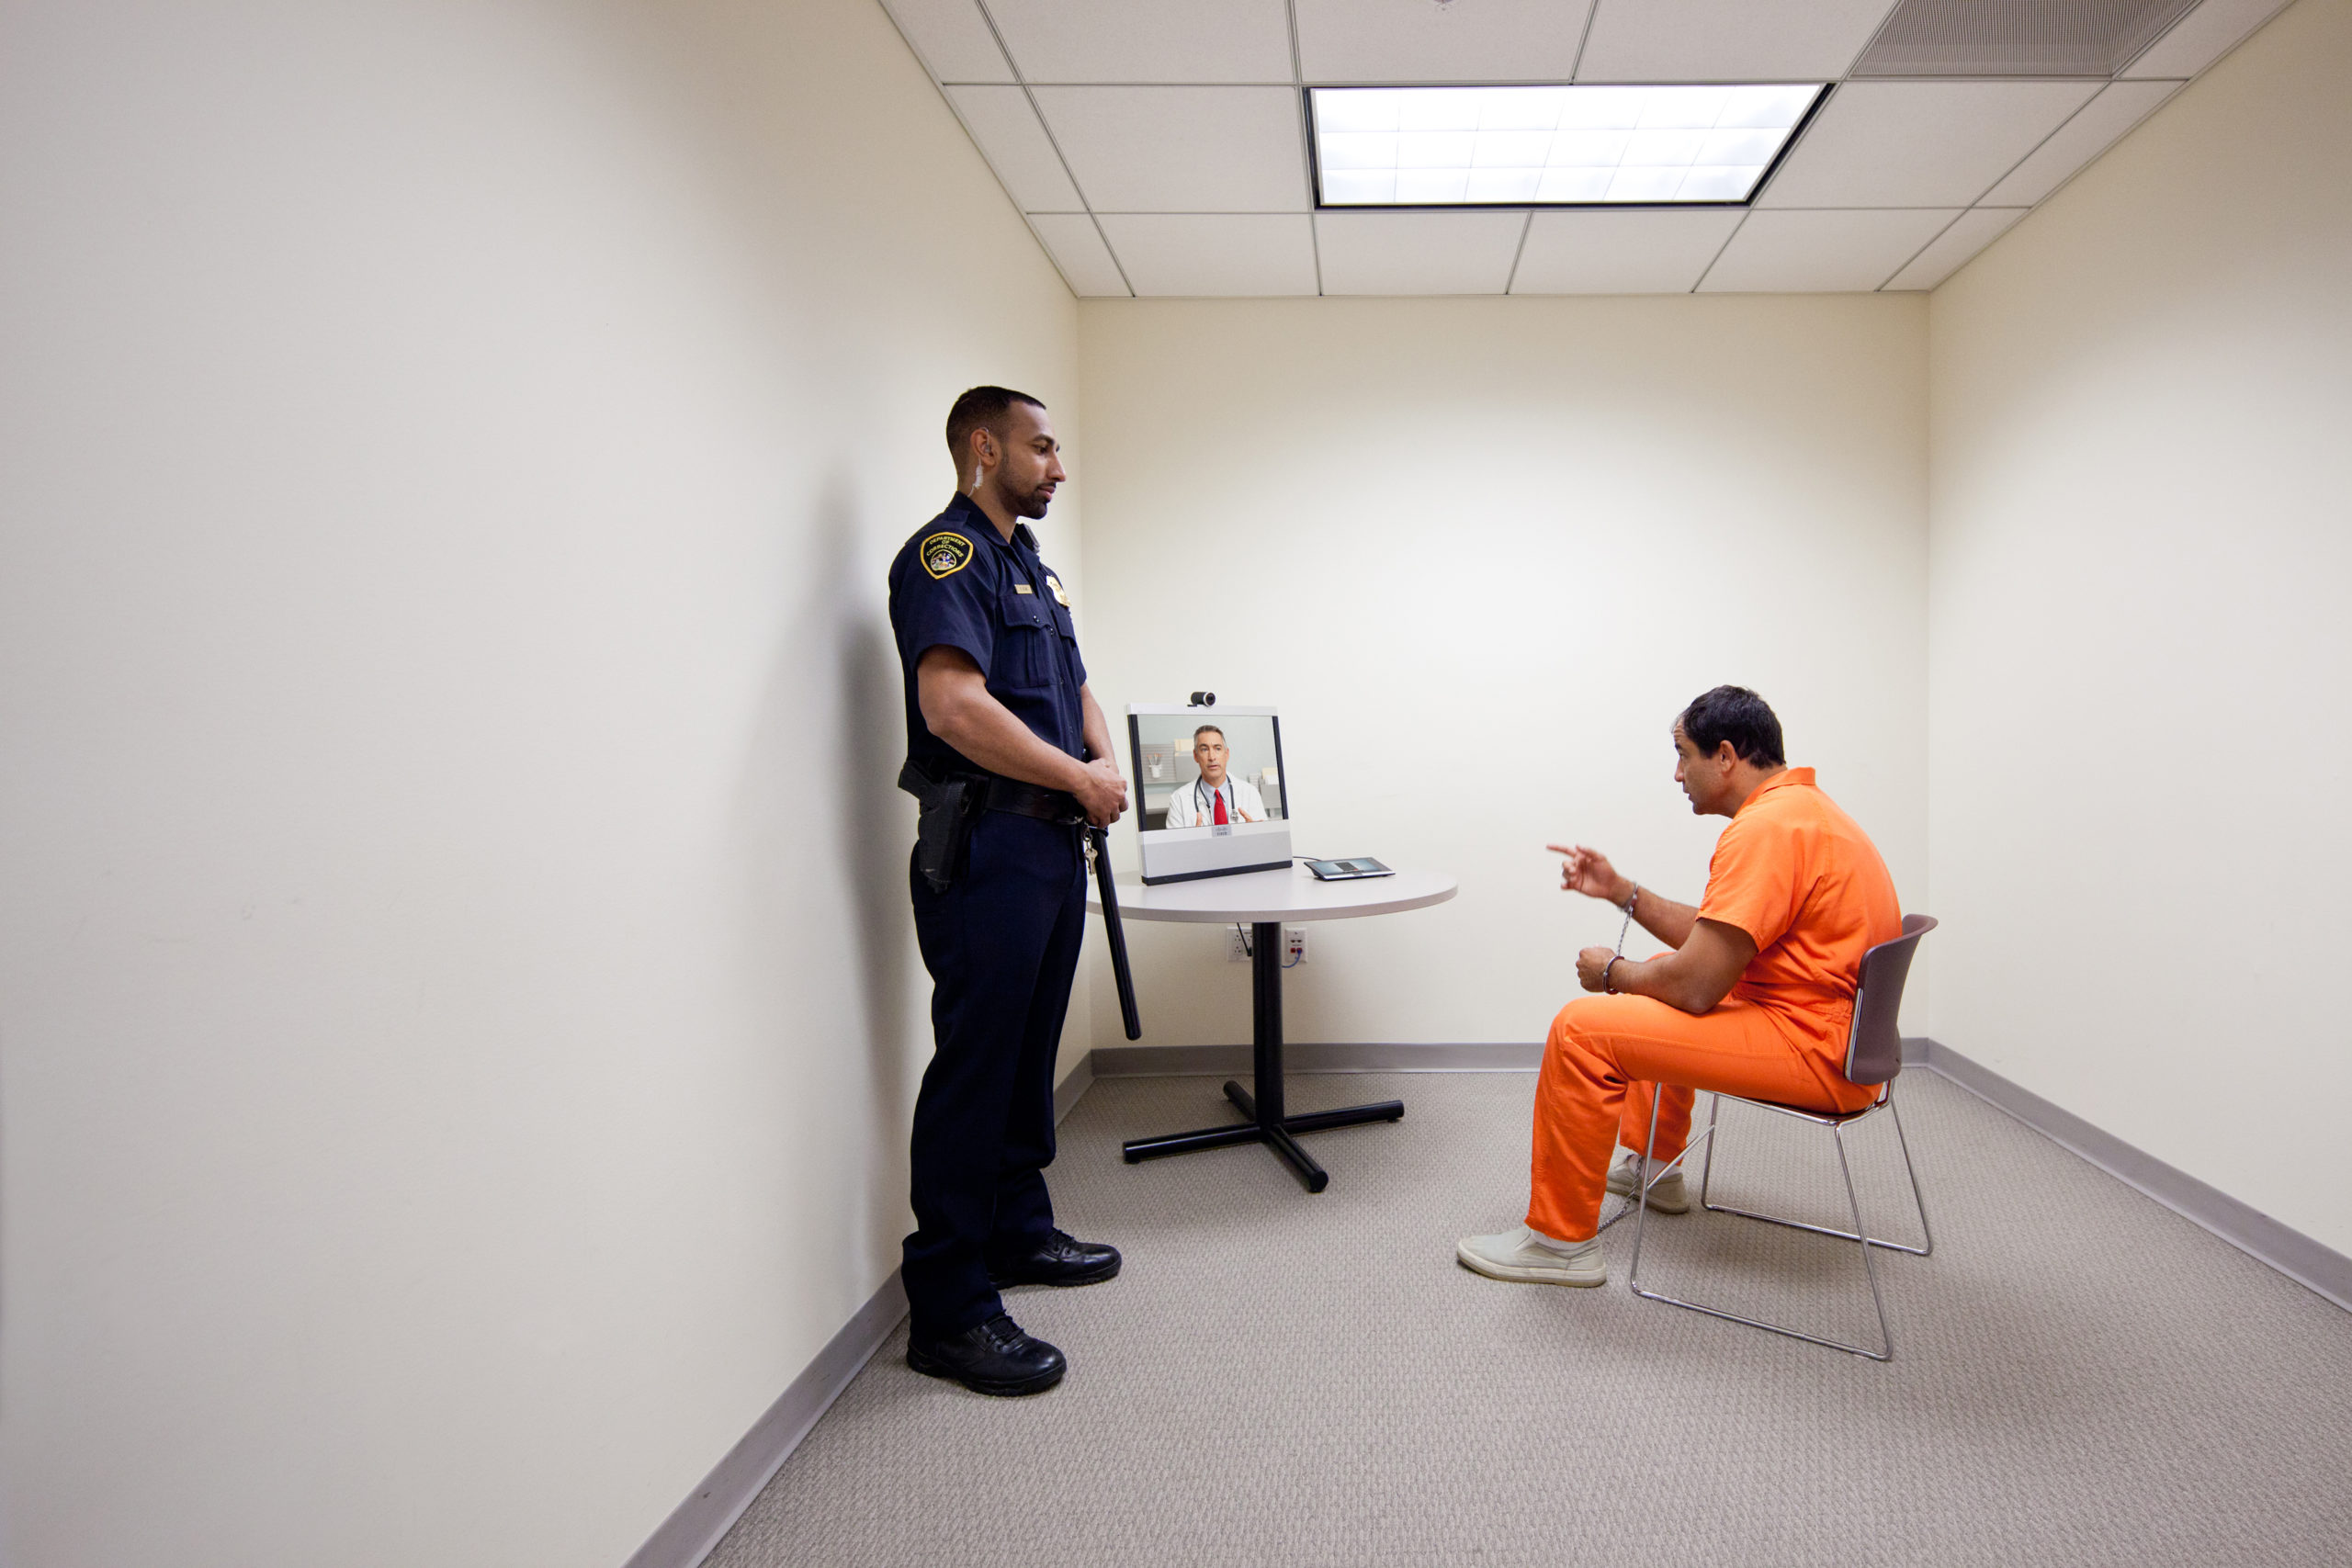 inmate talking to doctor virtually